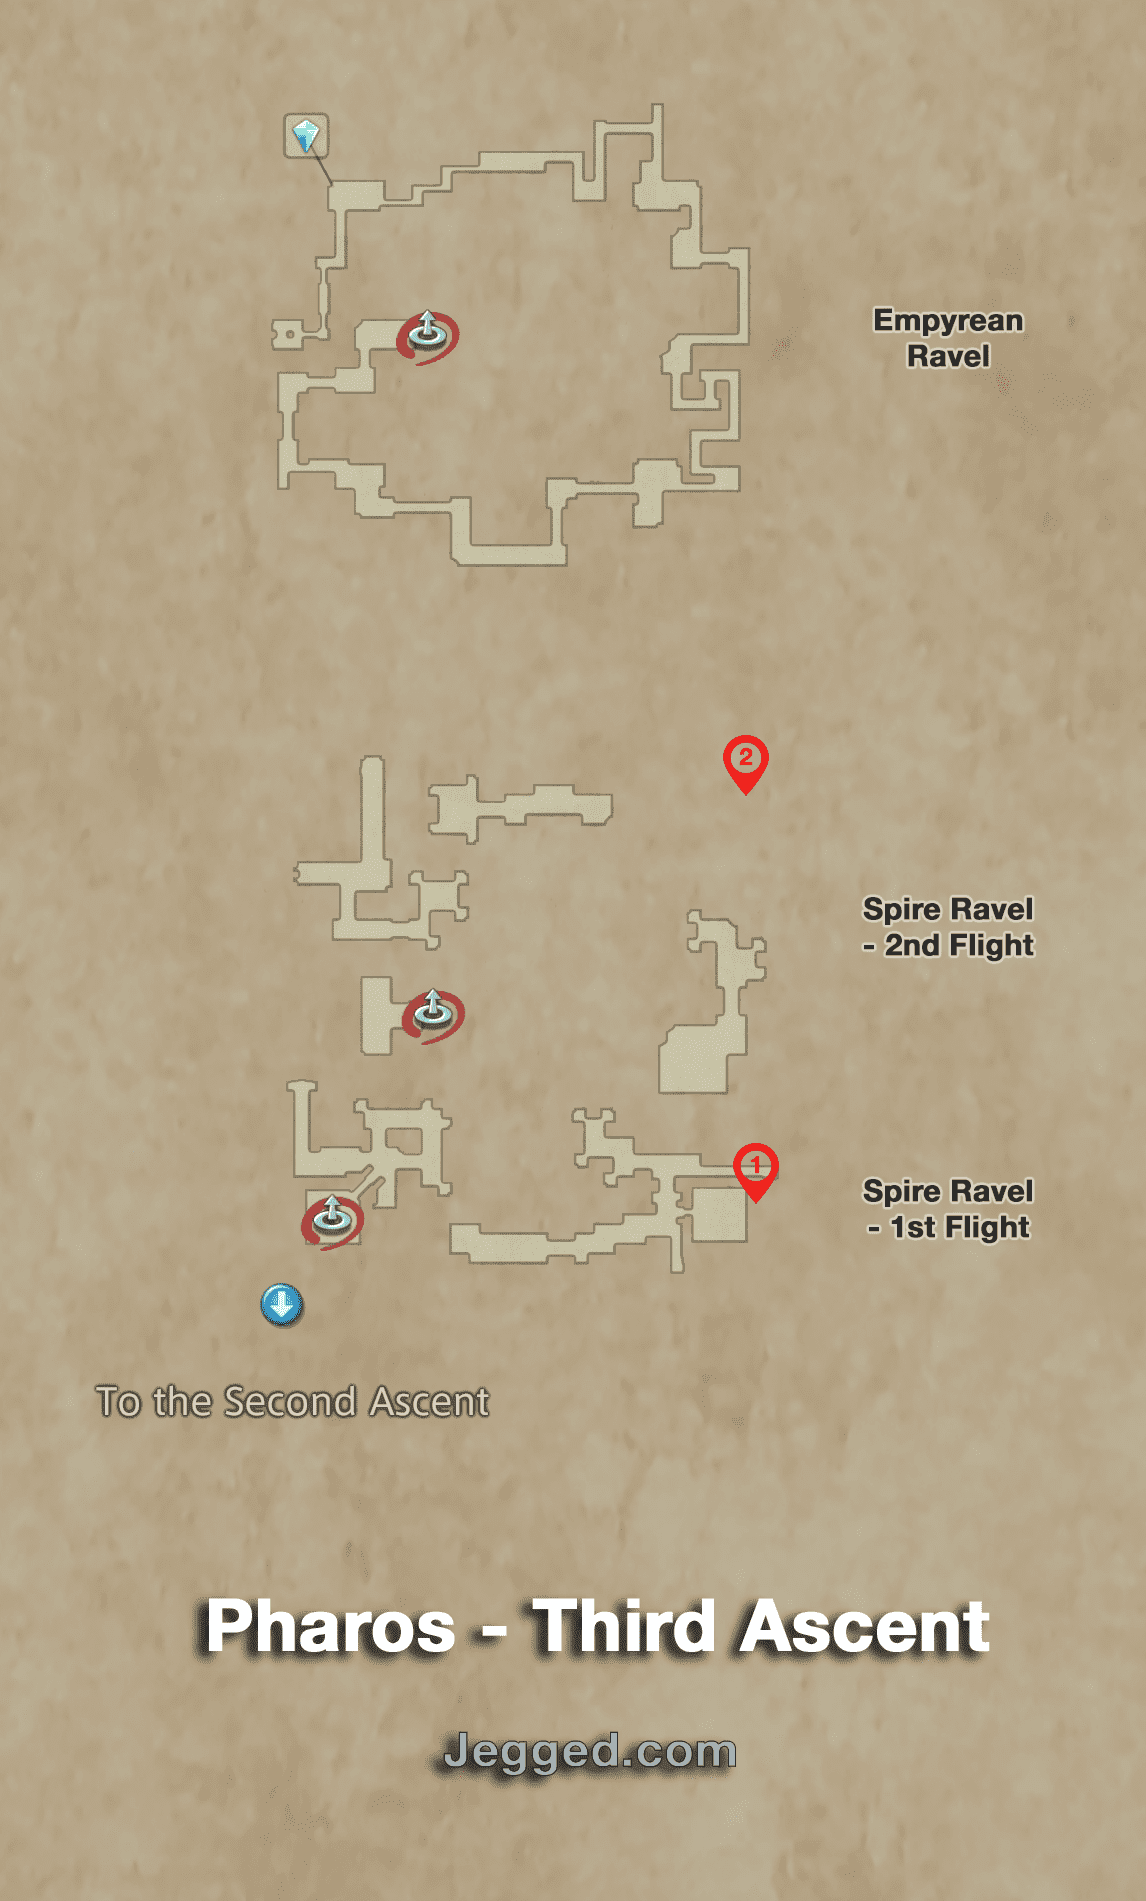 Map of the Pharos - Third Ascent